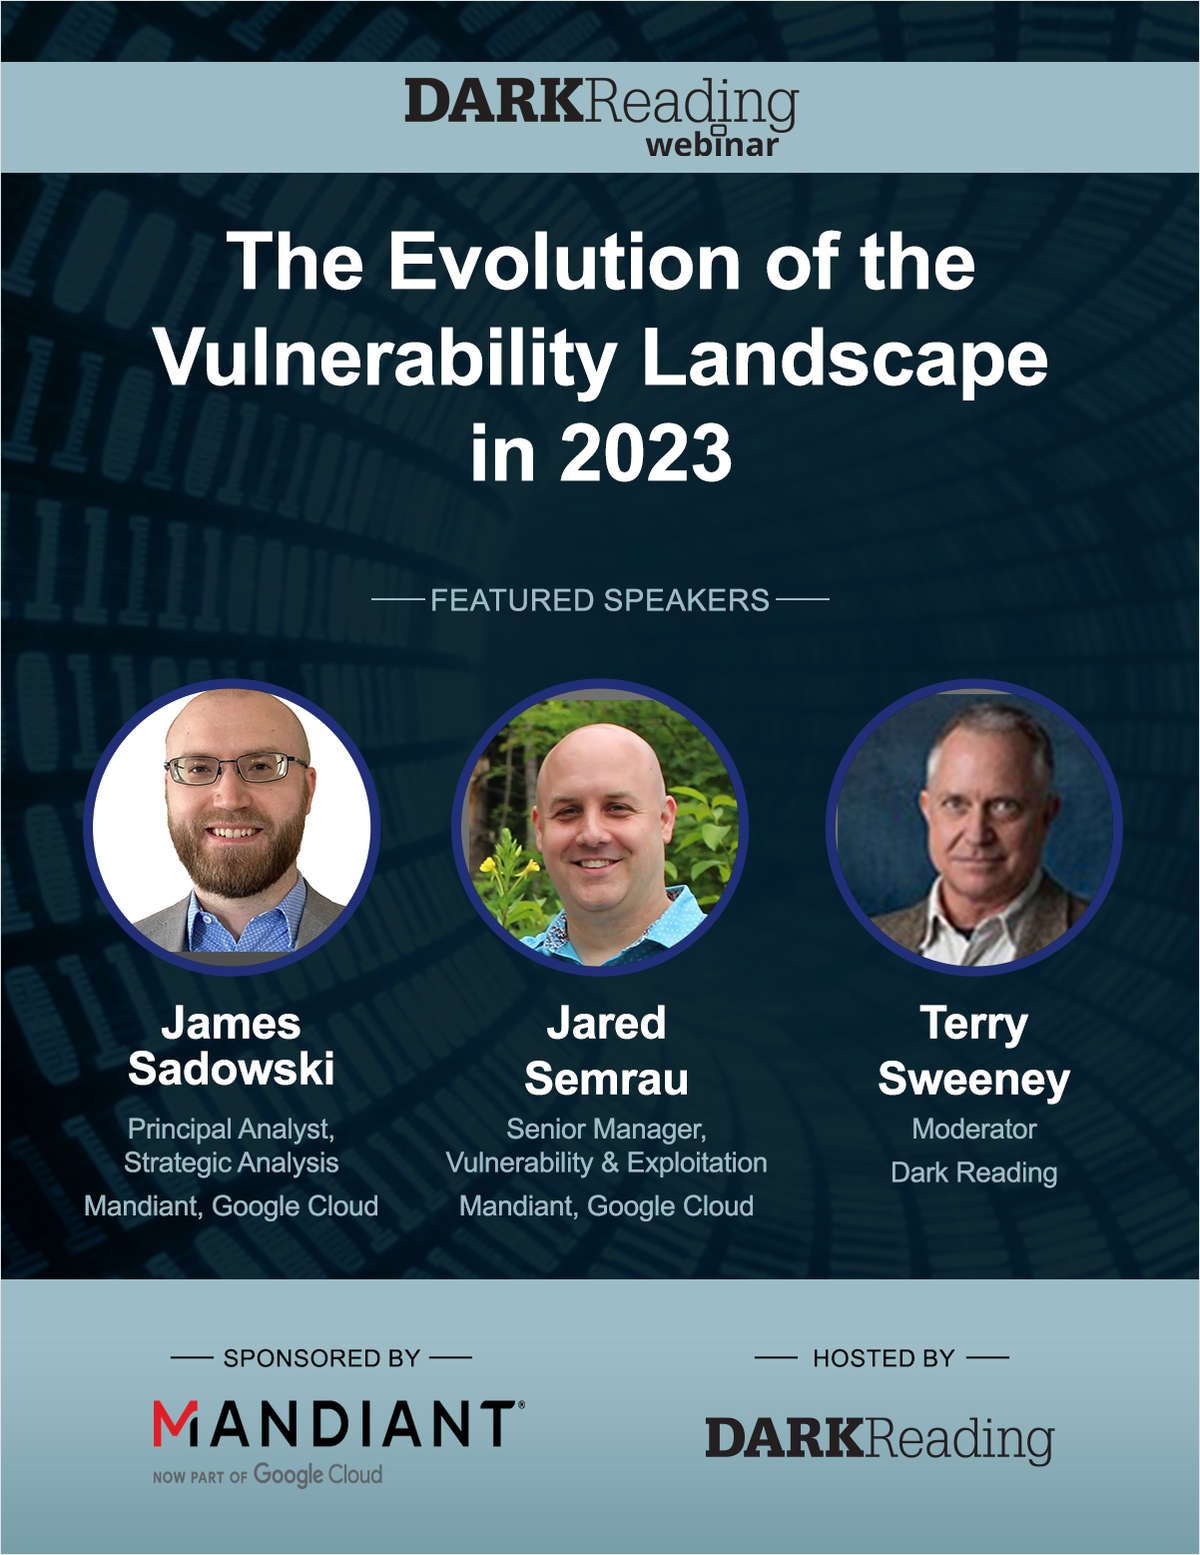 The Evolution of the Vulnerability Landscape in 2023